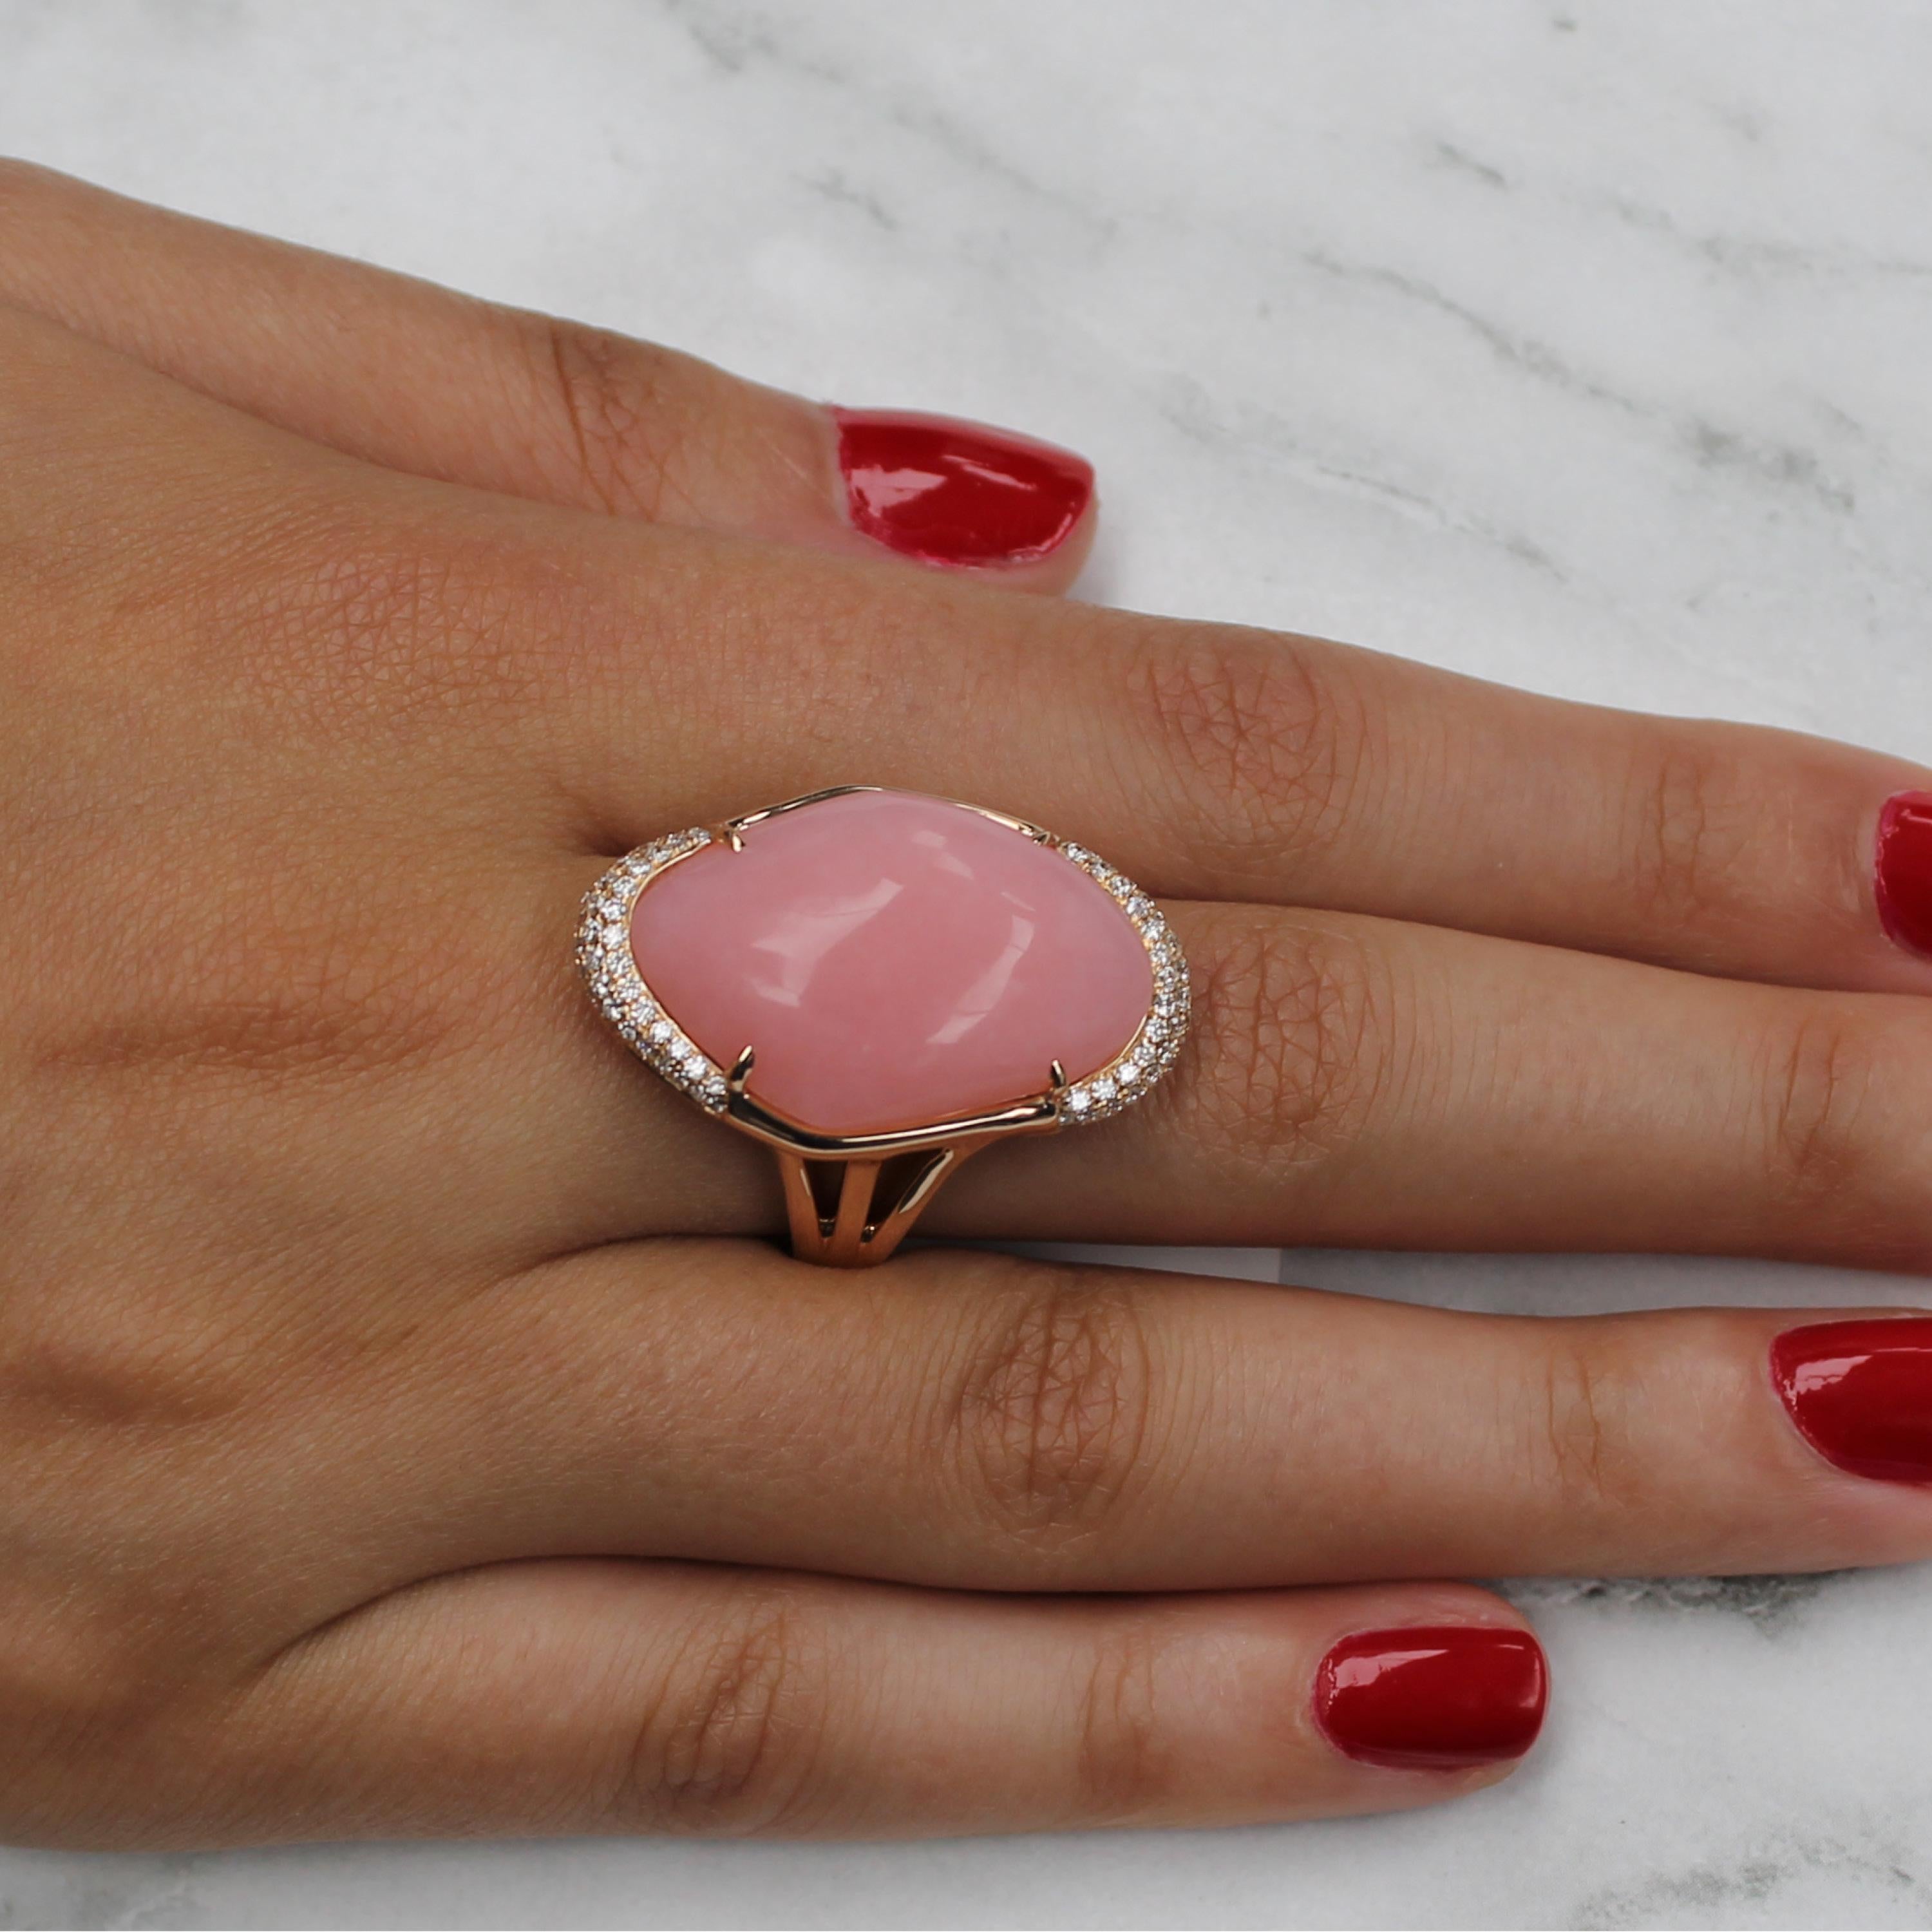 Cabochon-cut Pink Opal ring, with pave diamond accents, split shank, set in 18K rose gold. Finger size 6.5, adjustable upon request/quote. Pink Opal is a powerful stone, known for healing the emotions, especially those connected with subconsciously